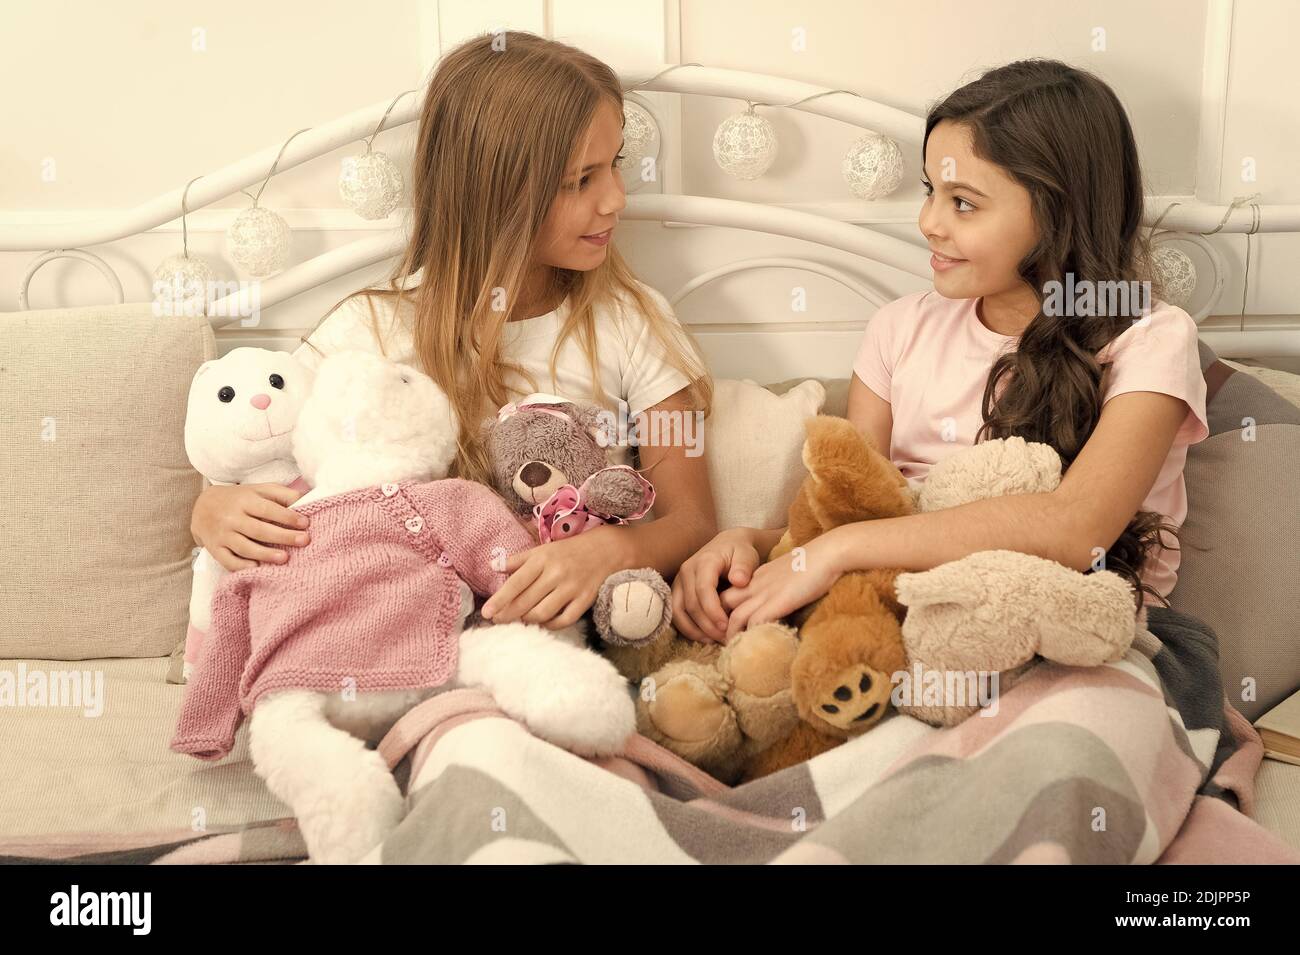 Sisters unite. Little sisters play toys in bed. Small sisters relax before nap time. Adorable sisters or friends in bedroom. Sisterhood and family. Friendship. Future is female. Stock Photo